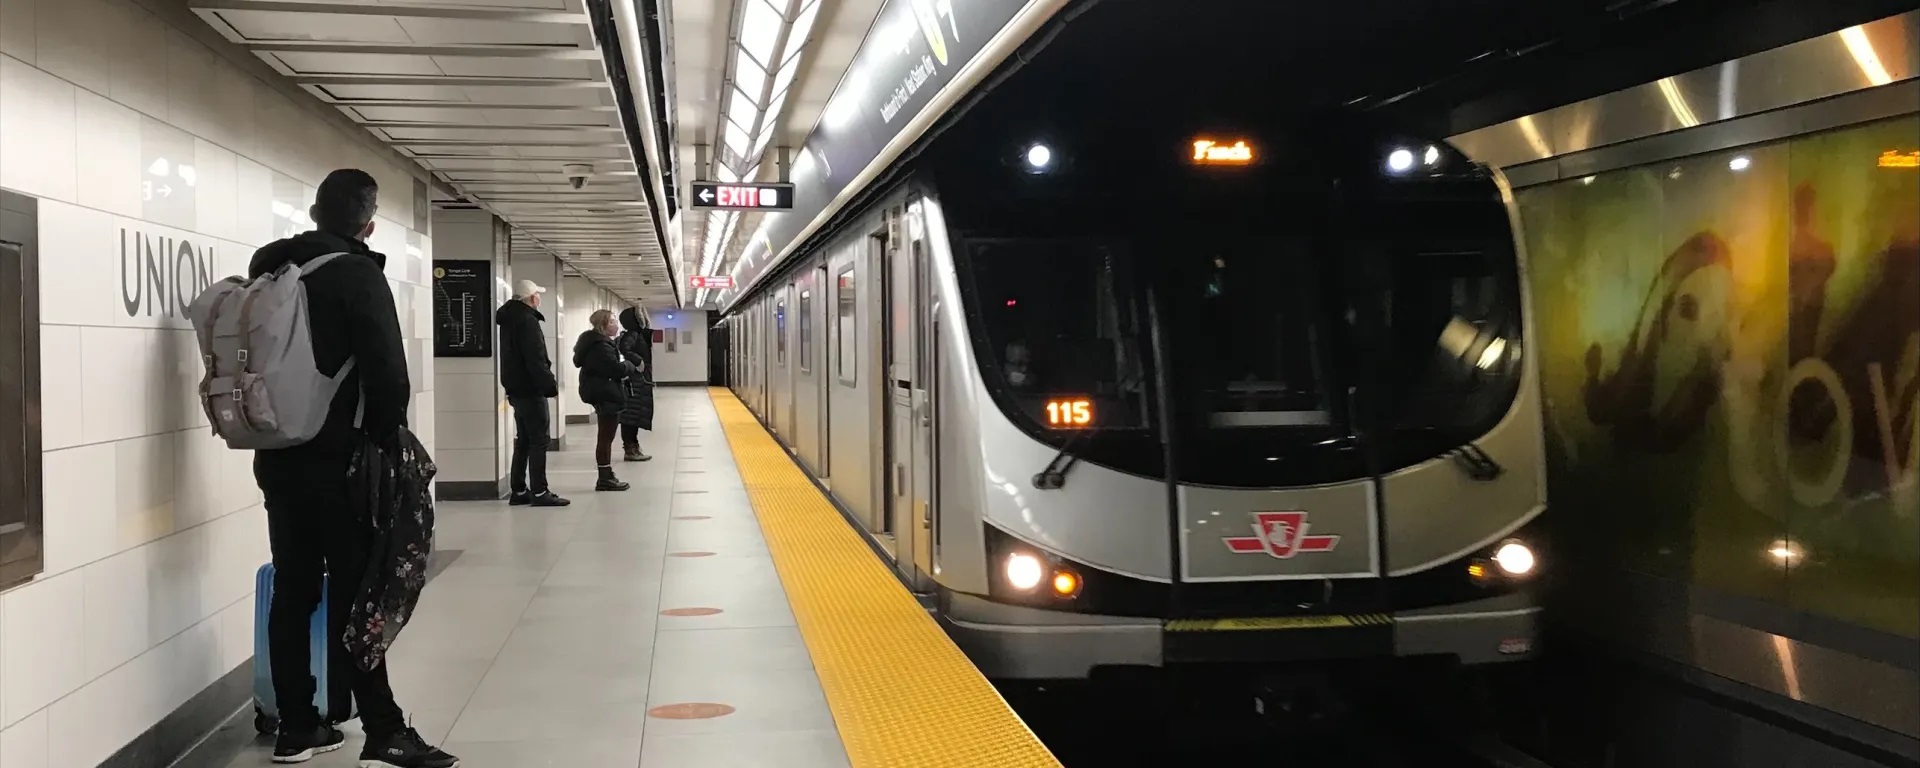 RFP issued for Yonge North Subway Extension tunnelling work - Metrolinx